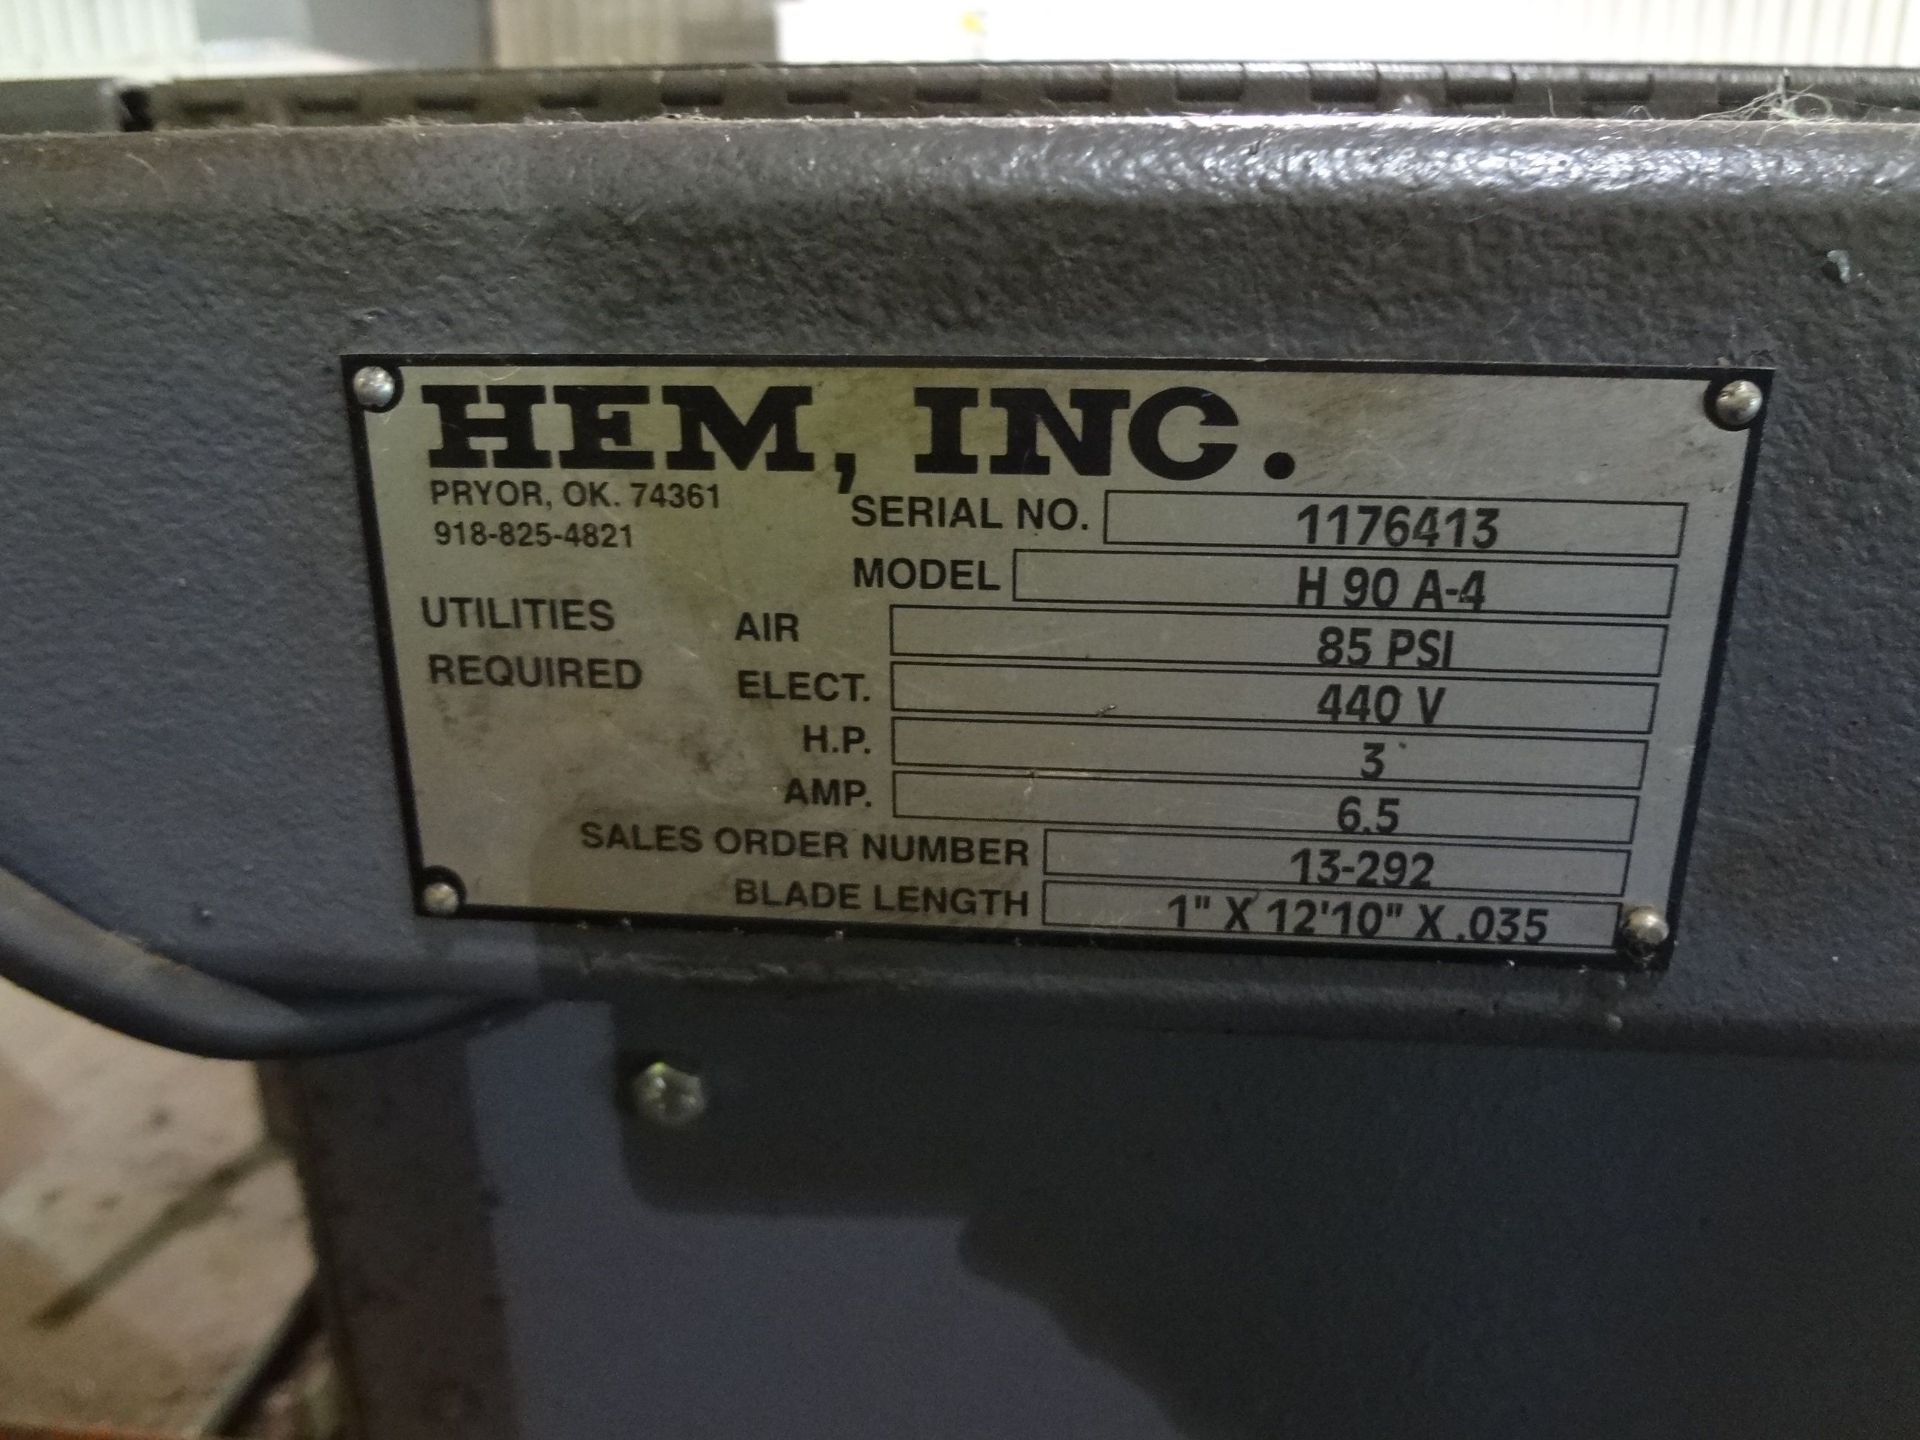 12" X 12" HEM-SAW MODEL H90A-4 AUTOMATIC HORIZONTAL BAND SAW; S/N 1176413, HYDRAULIC CLAMPING AND - Image 6 of 10